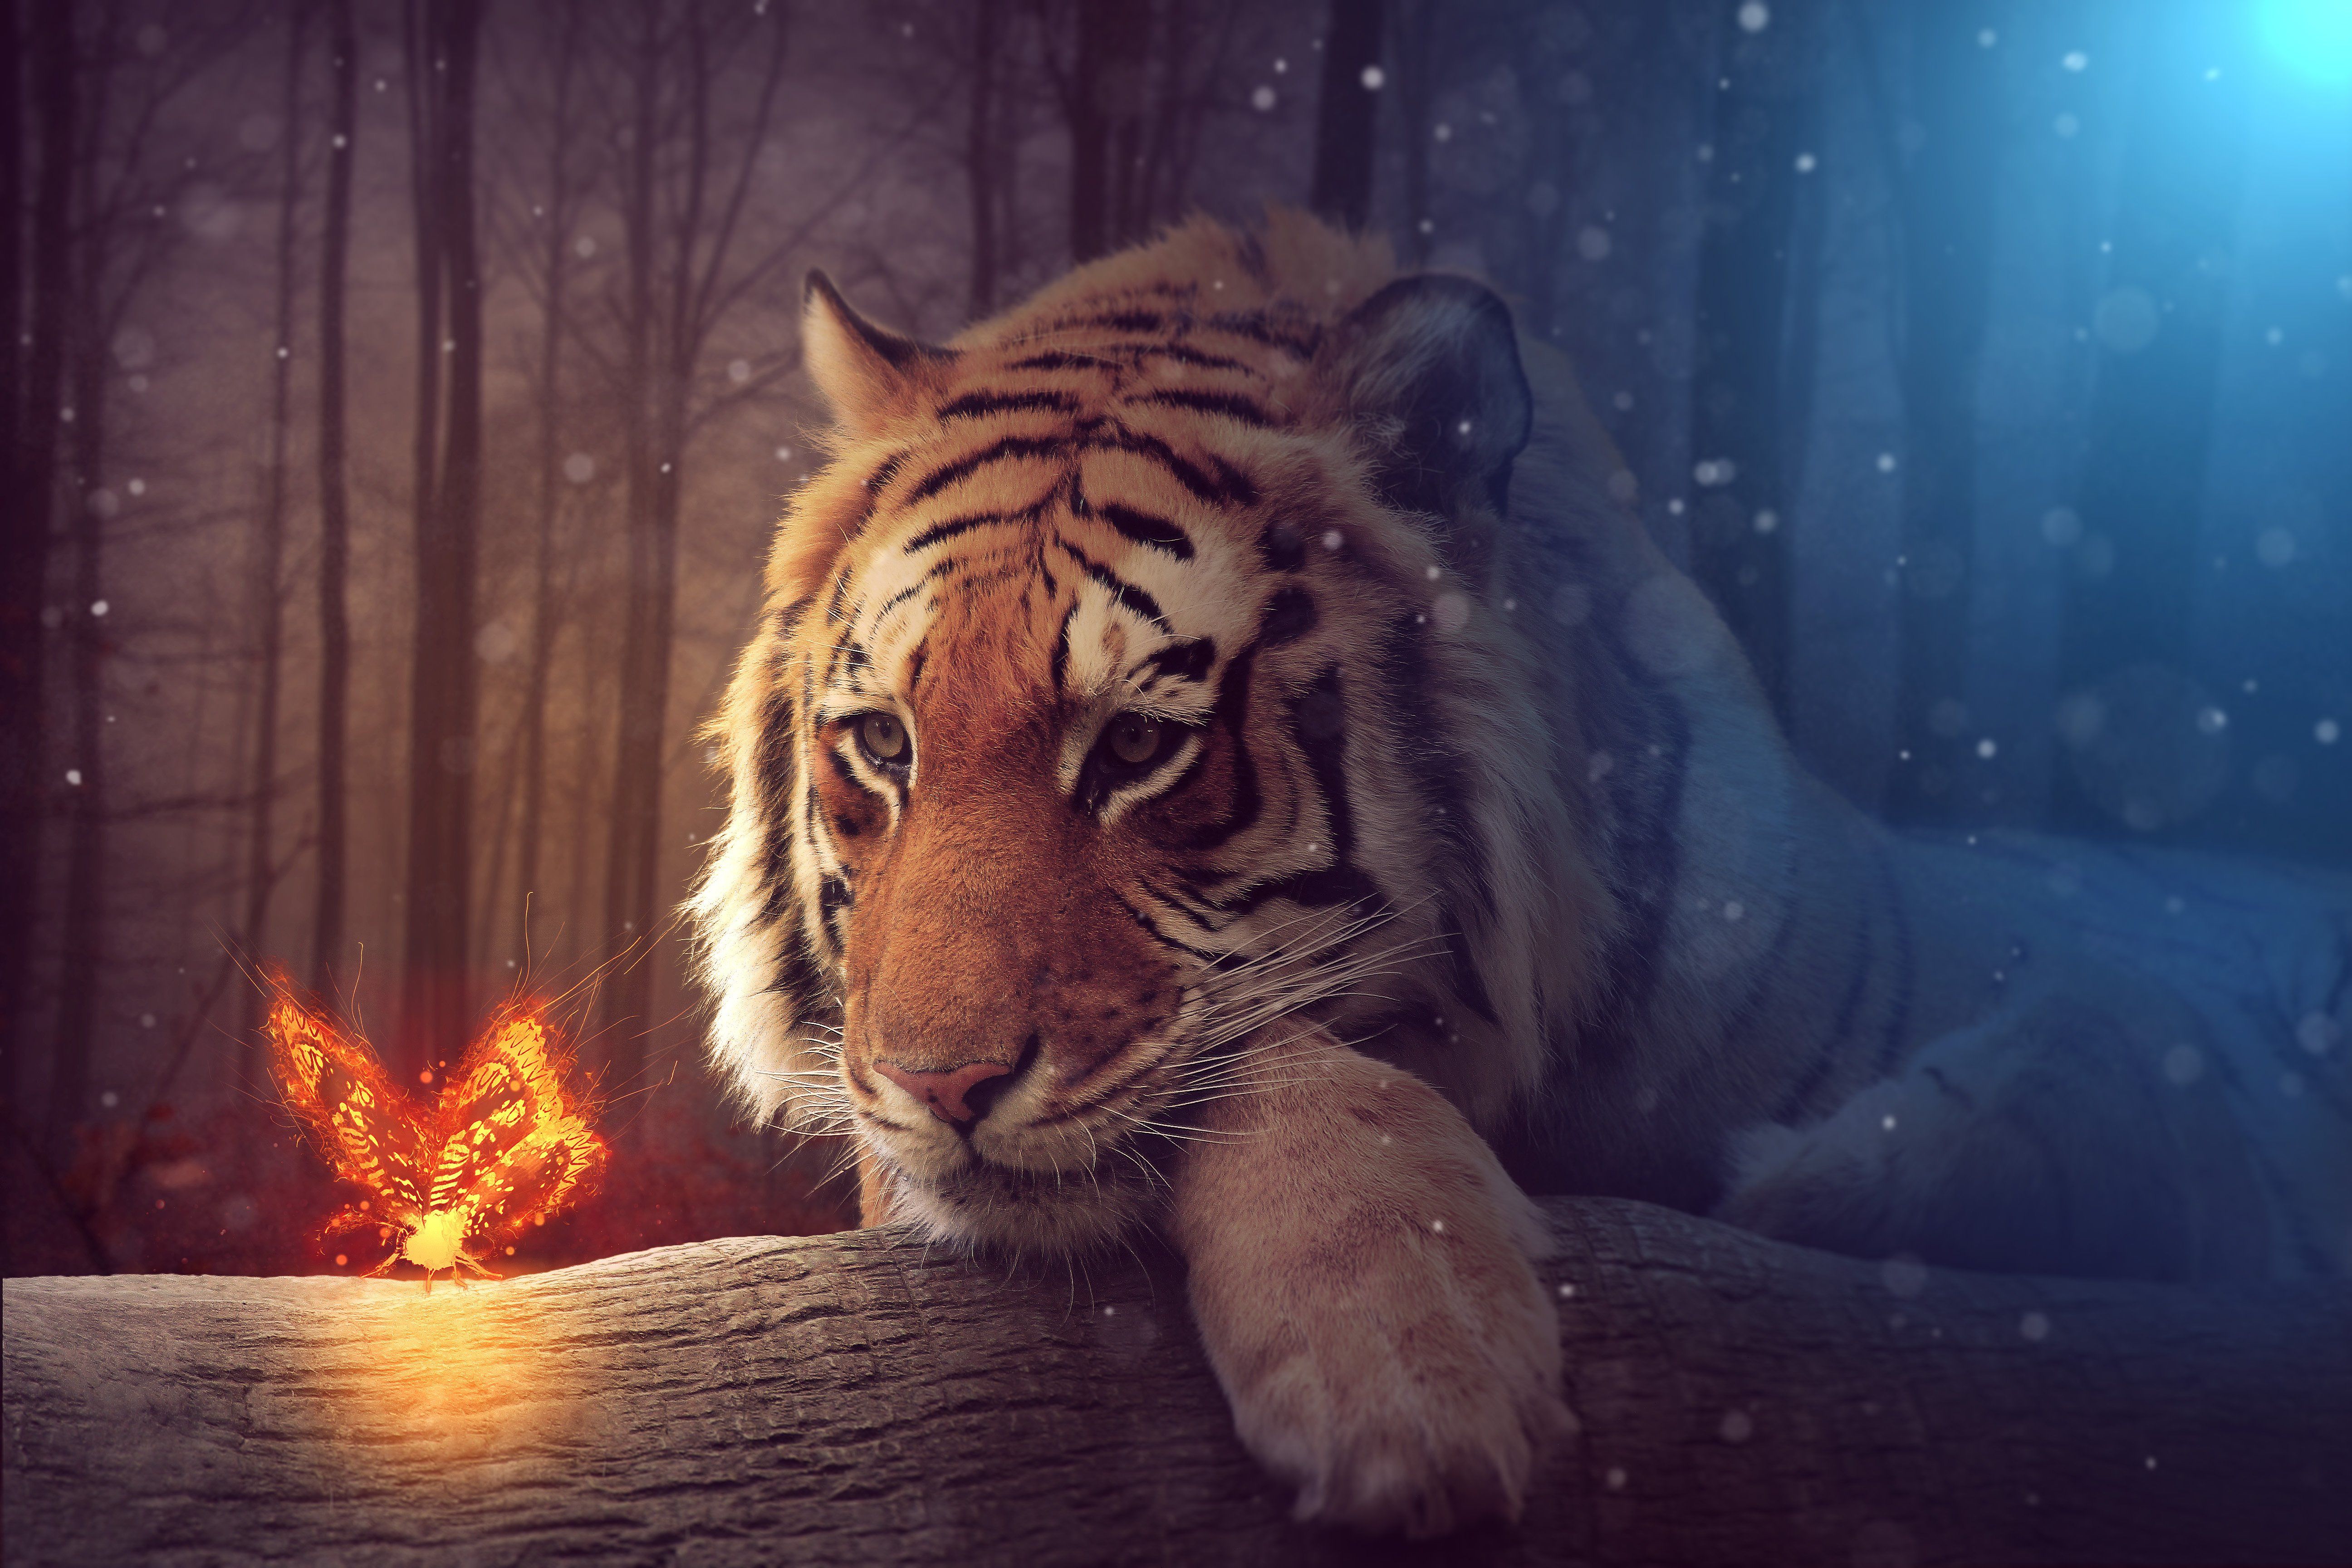 Tiger Dreamy Art, HD Artist, 4k Wallpaper, Image, Background, Photo and Picture